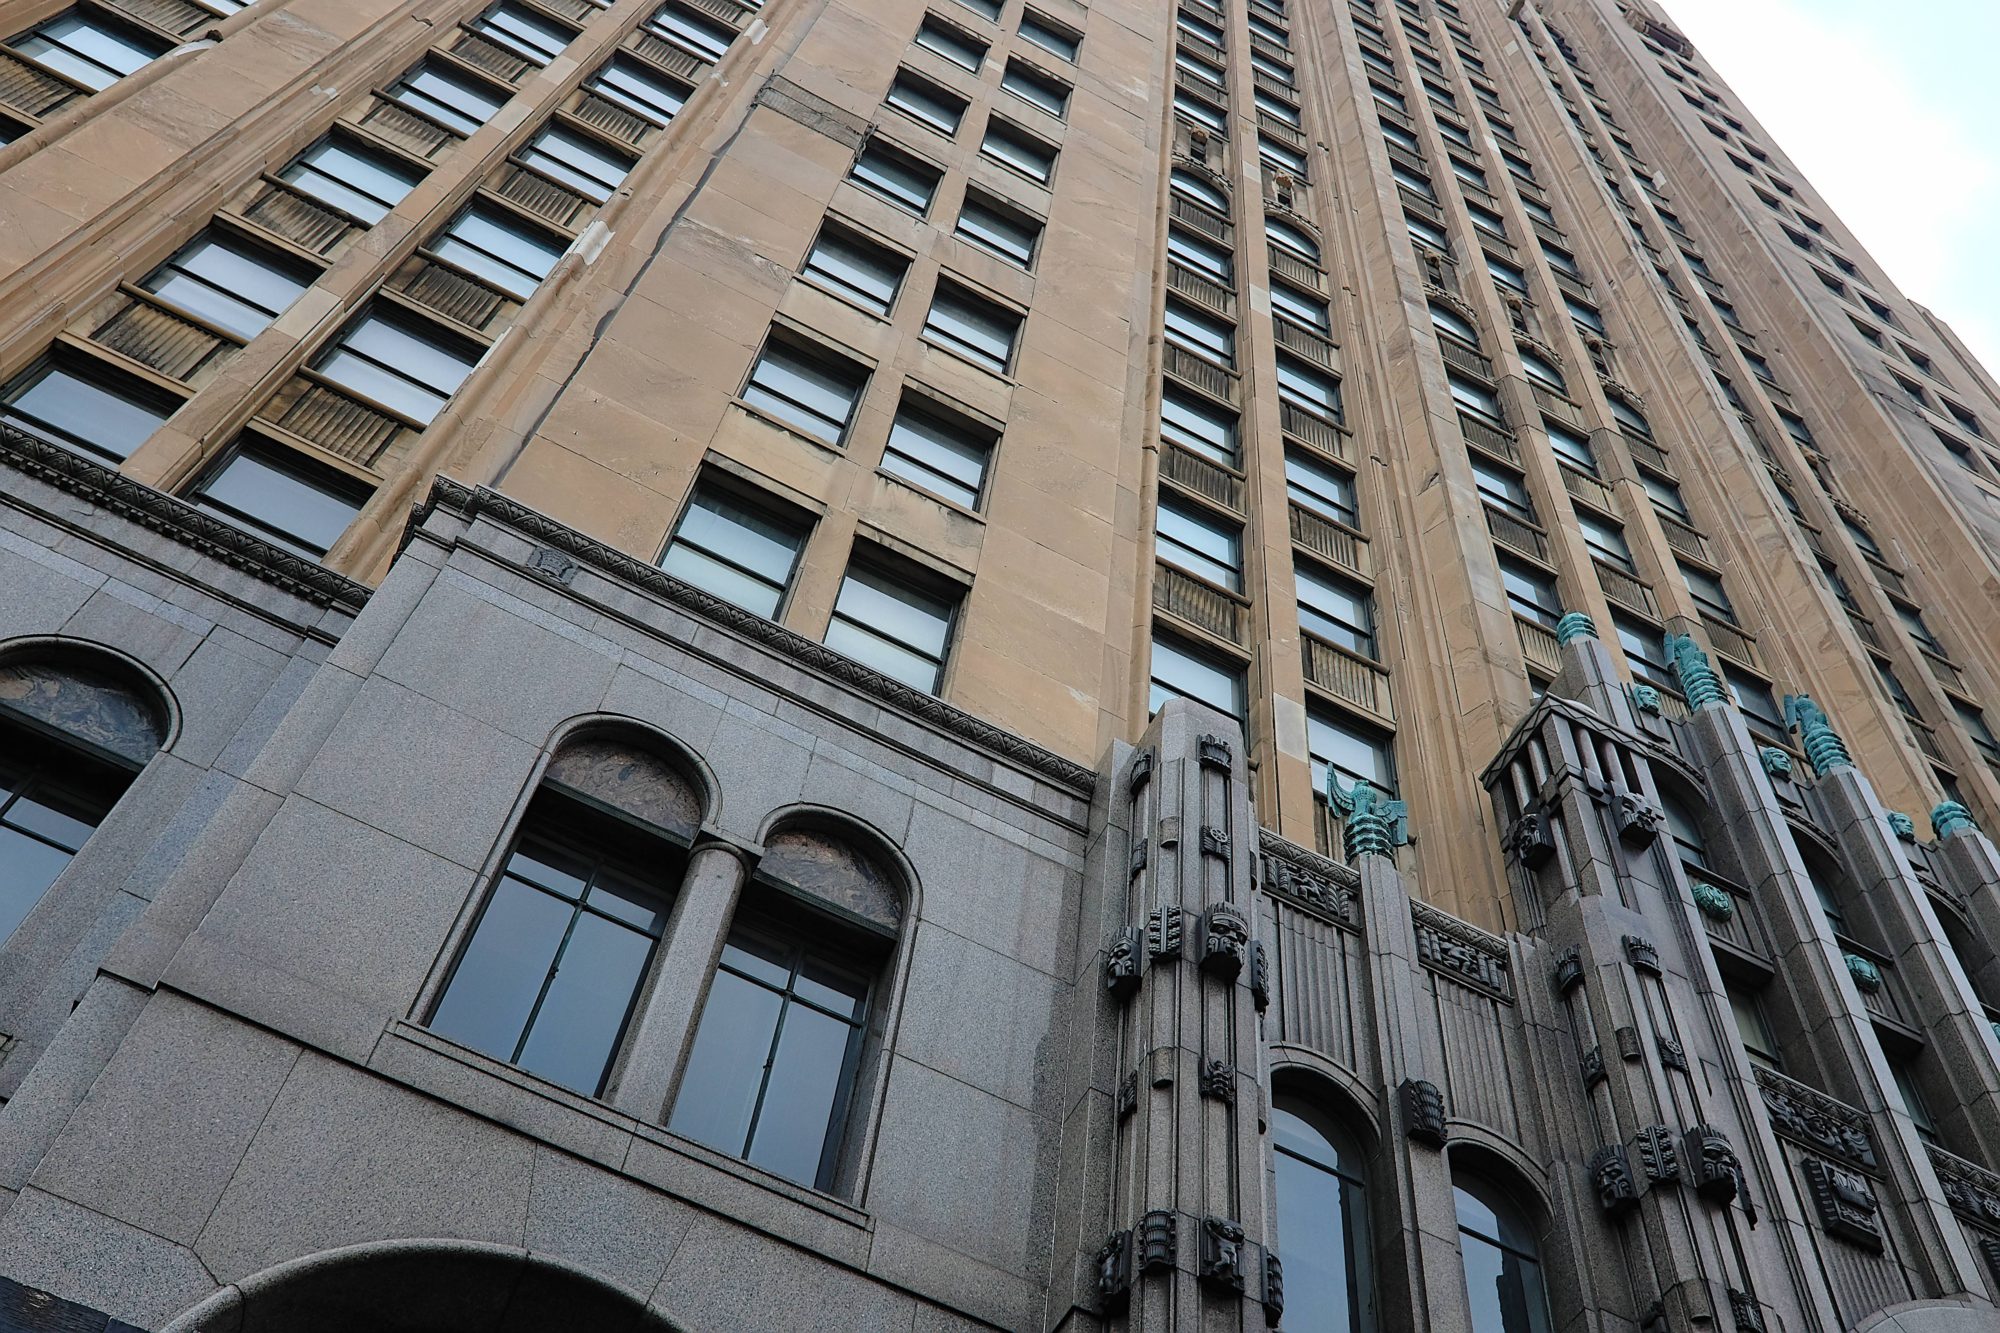 Exterior of the Fisher Building in Detroit